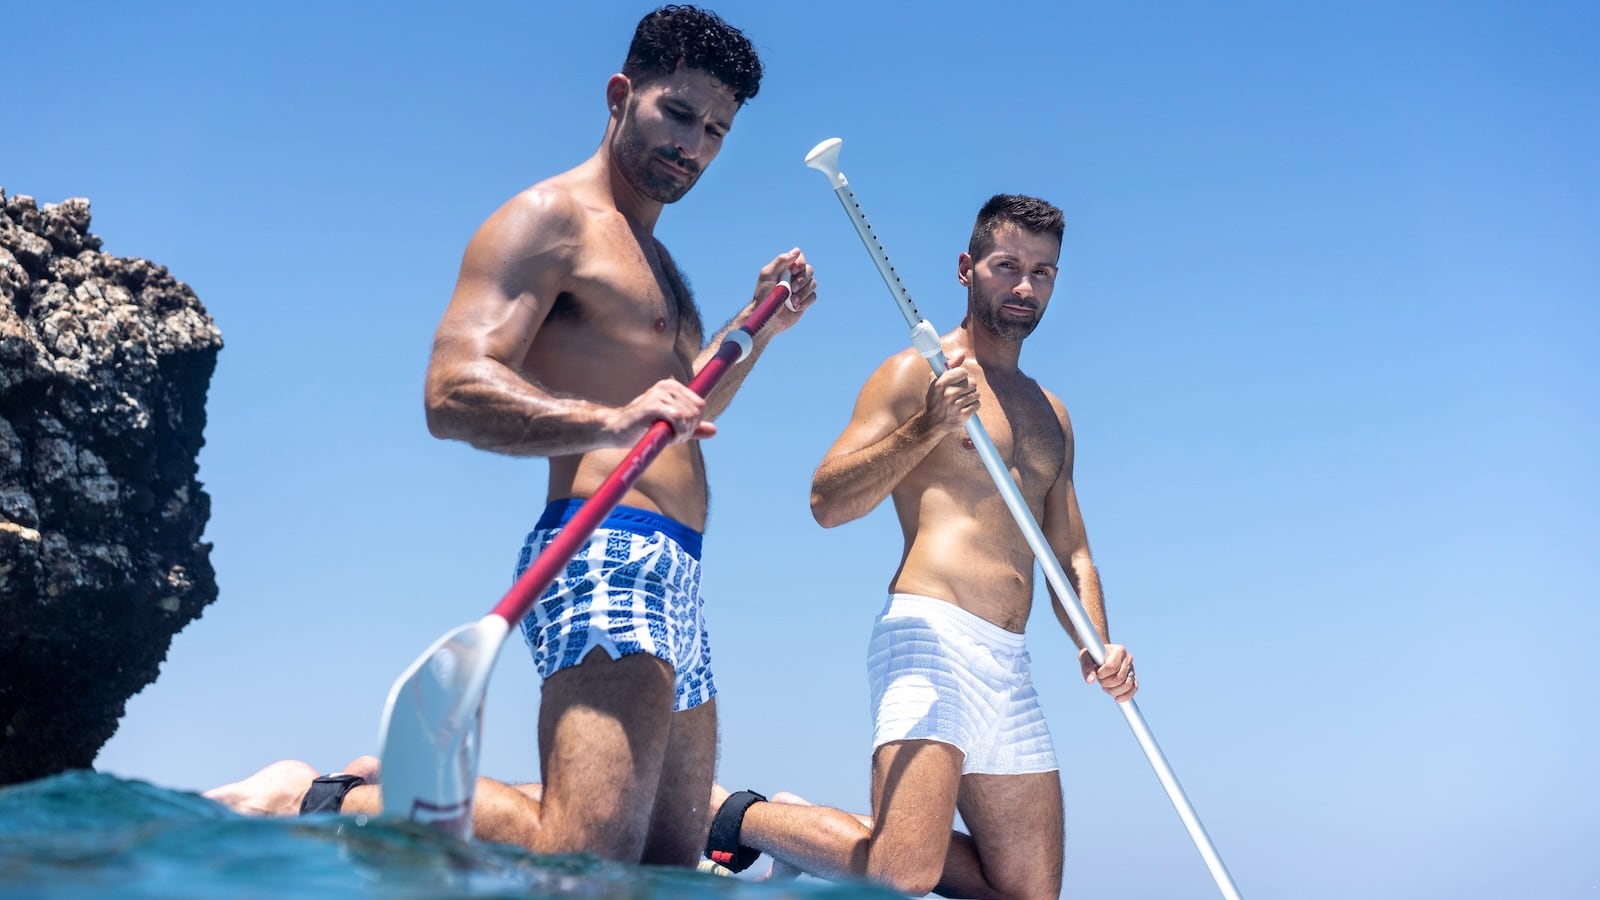 Stef and Seby paddleboarding in their Modus Vivendi swimwear.